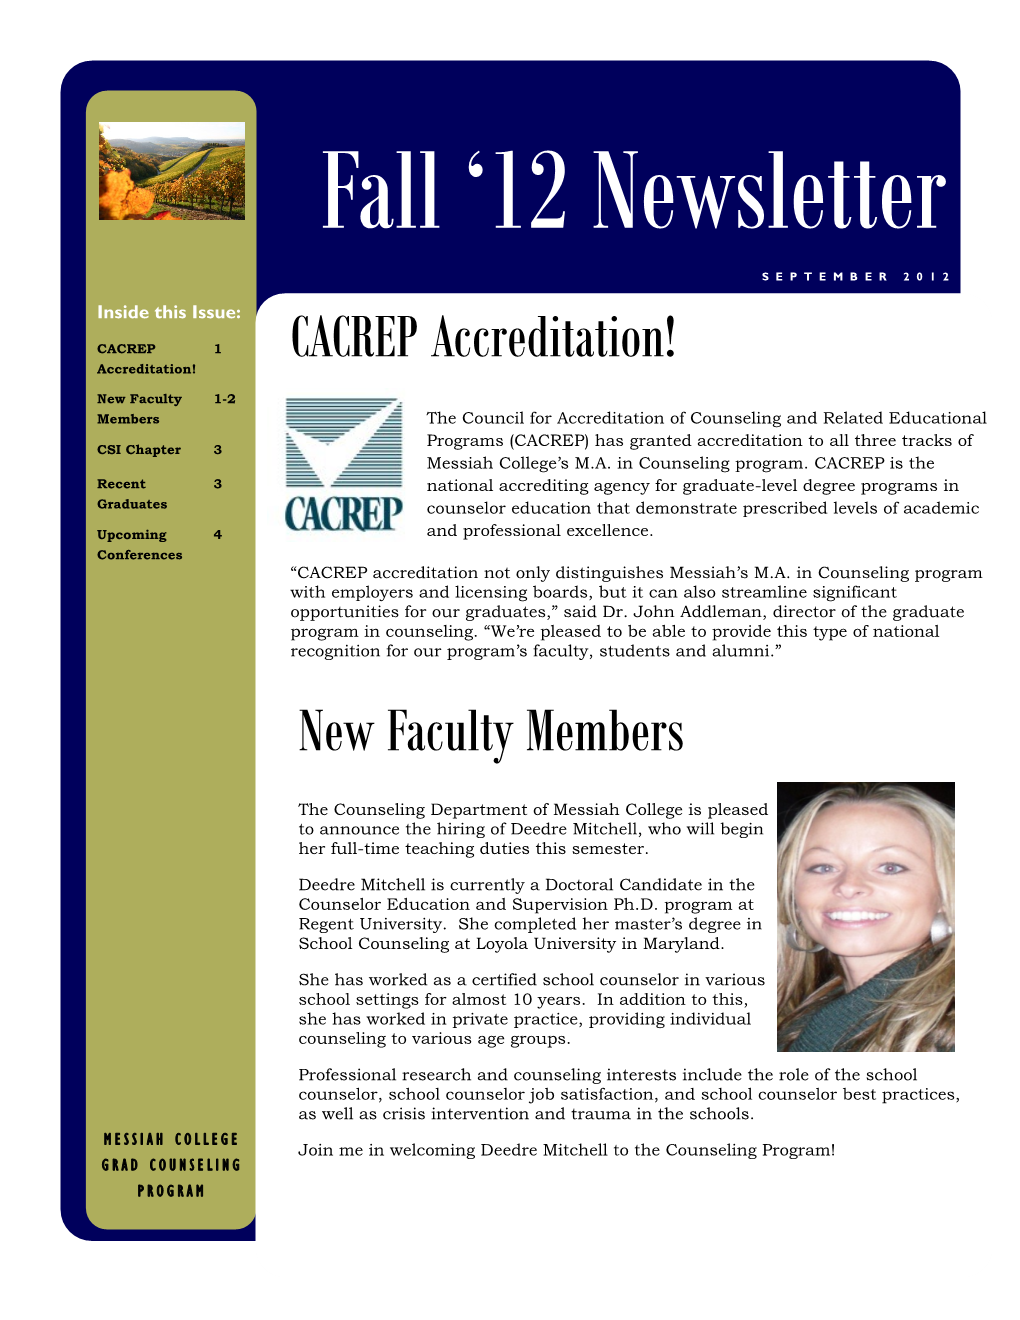 CACREP Accreditation! New Faculty Members